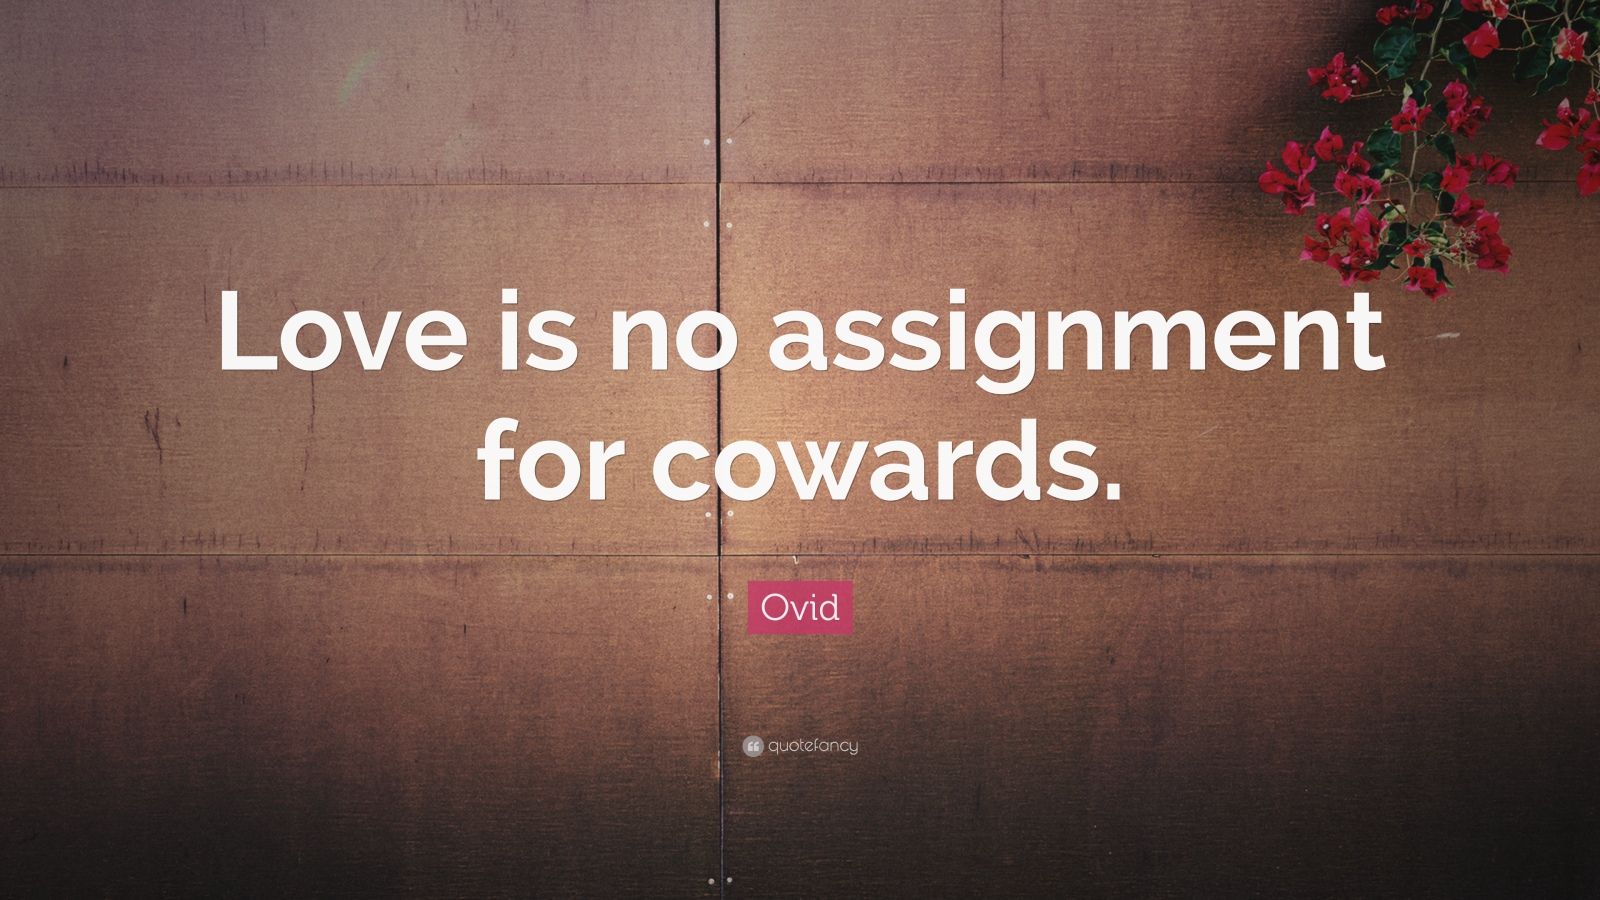 Ovid Quote “Love is no assignment for cowards.”